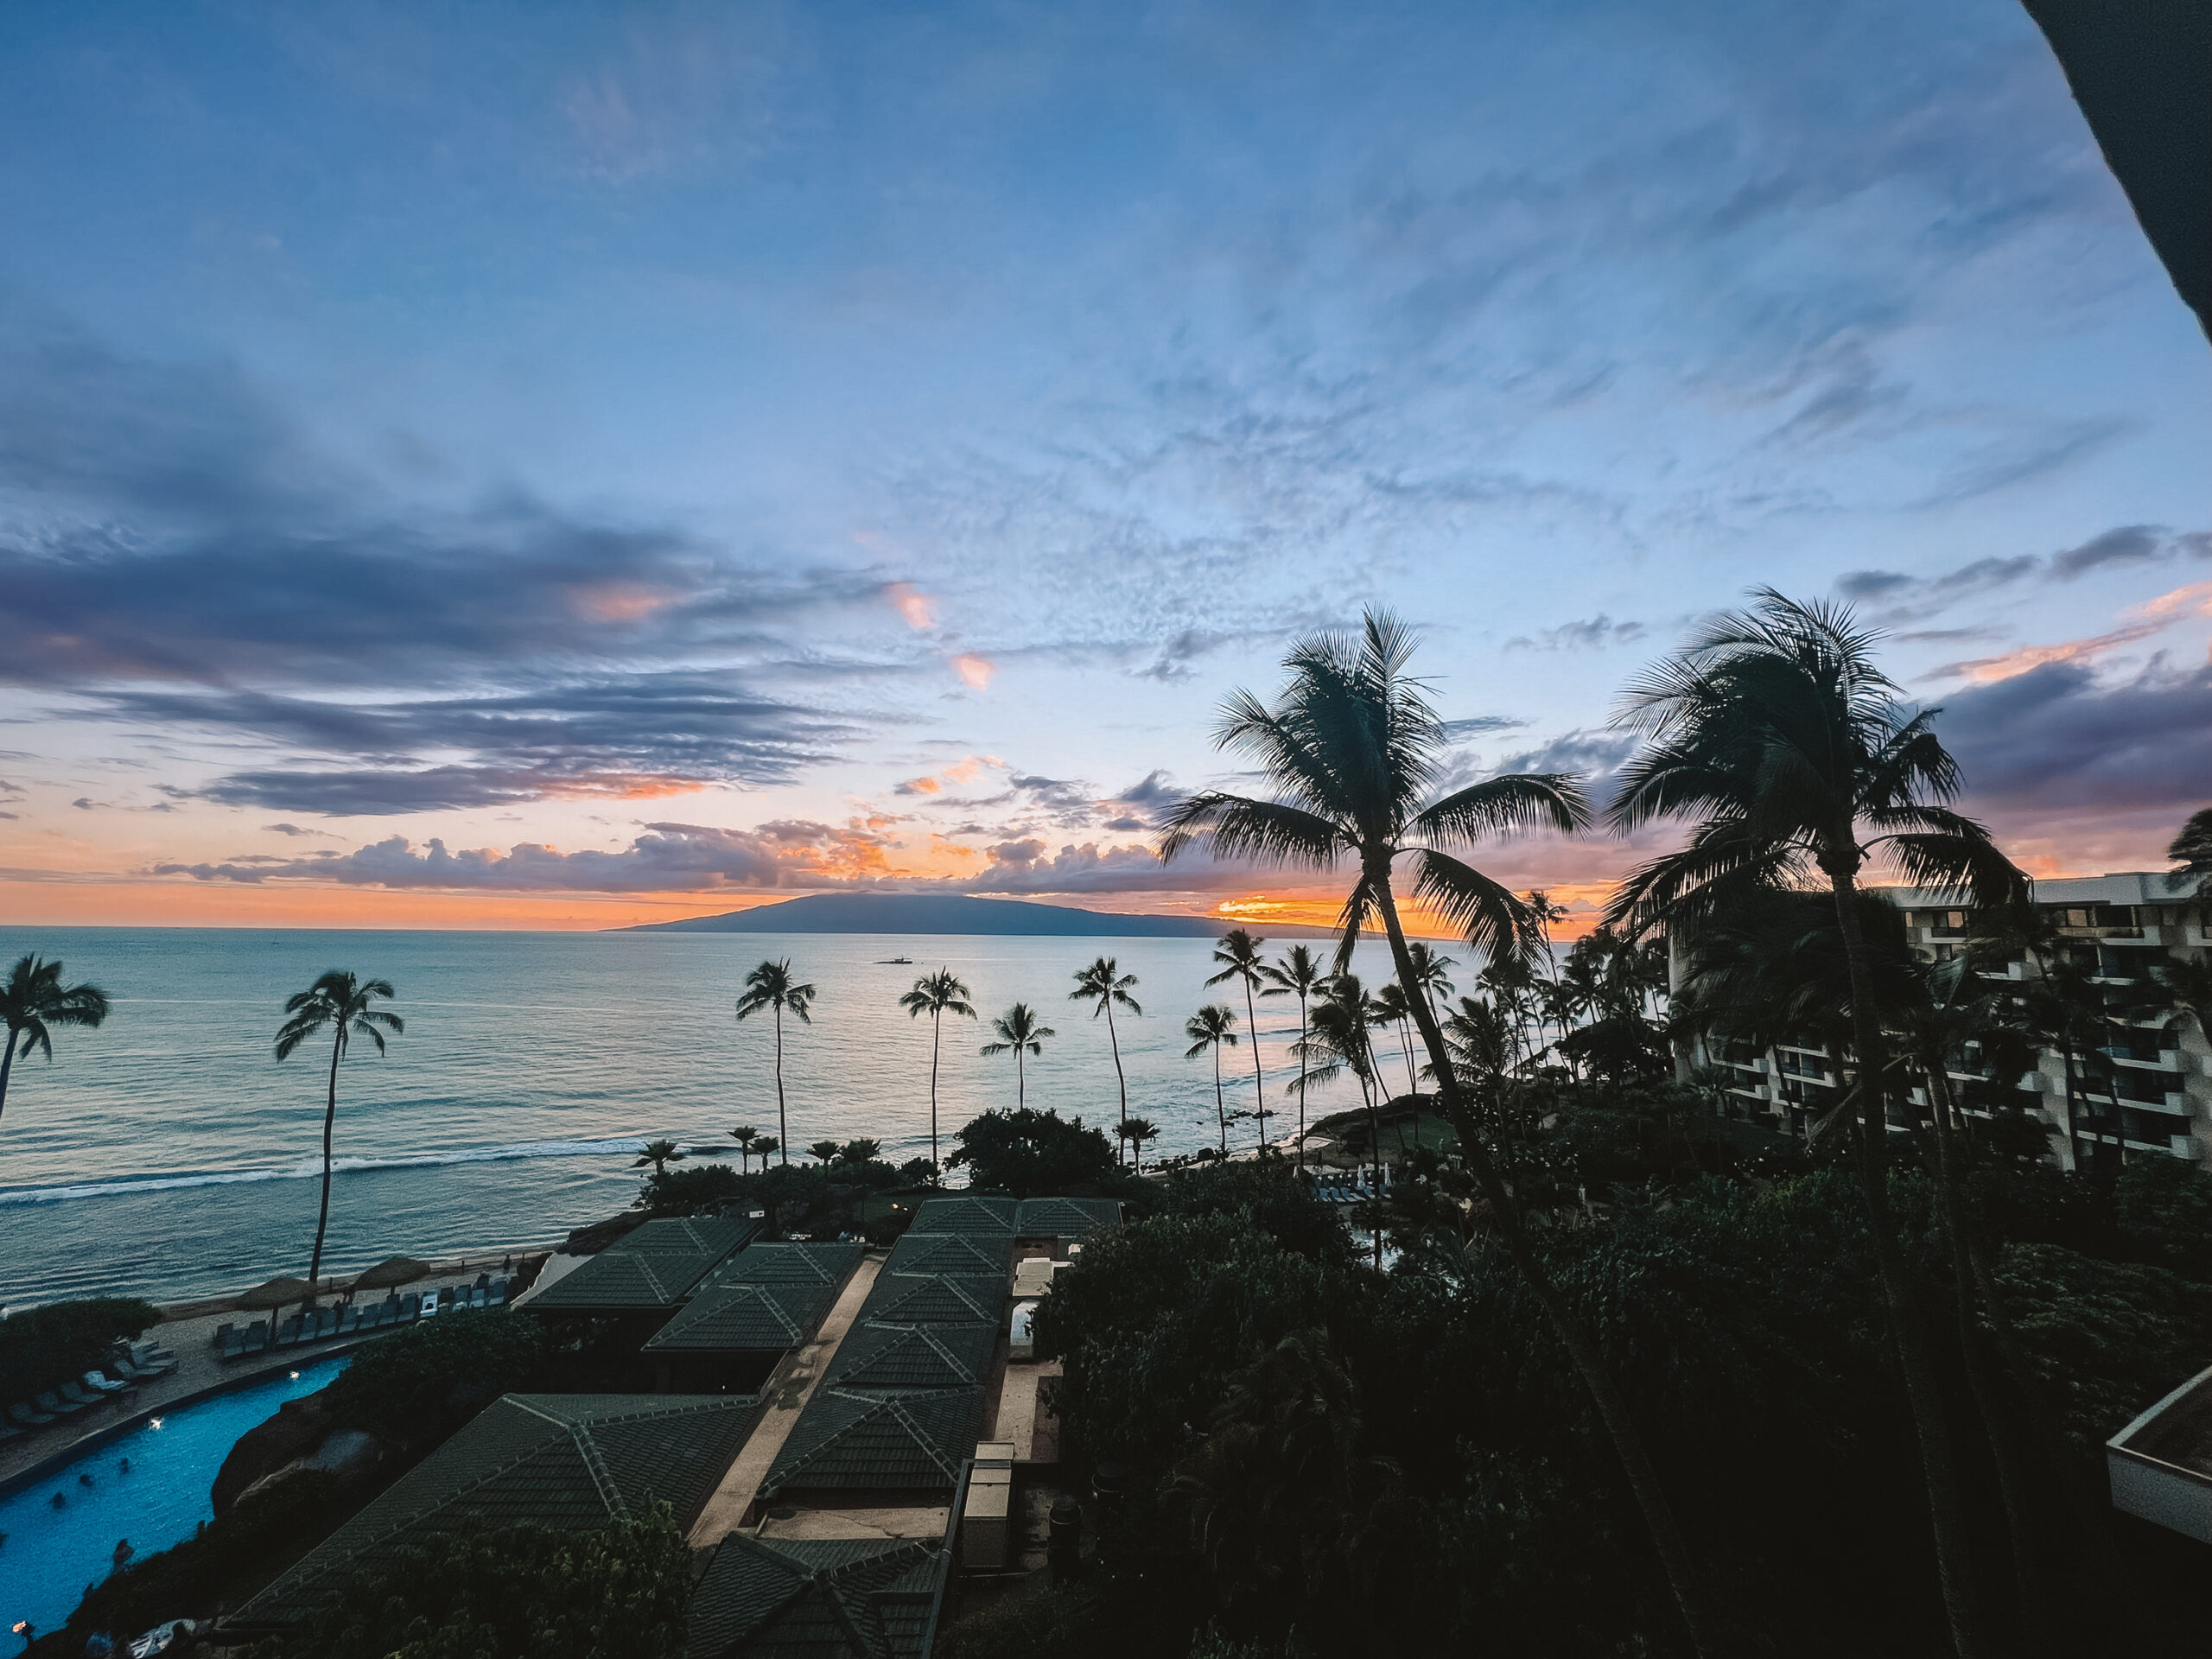 our gorgeous hotel property in Maui, Hawaii, the Hyatt Regency at sunset #theldltravels #thelovedesignedlife